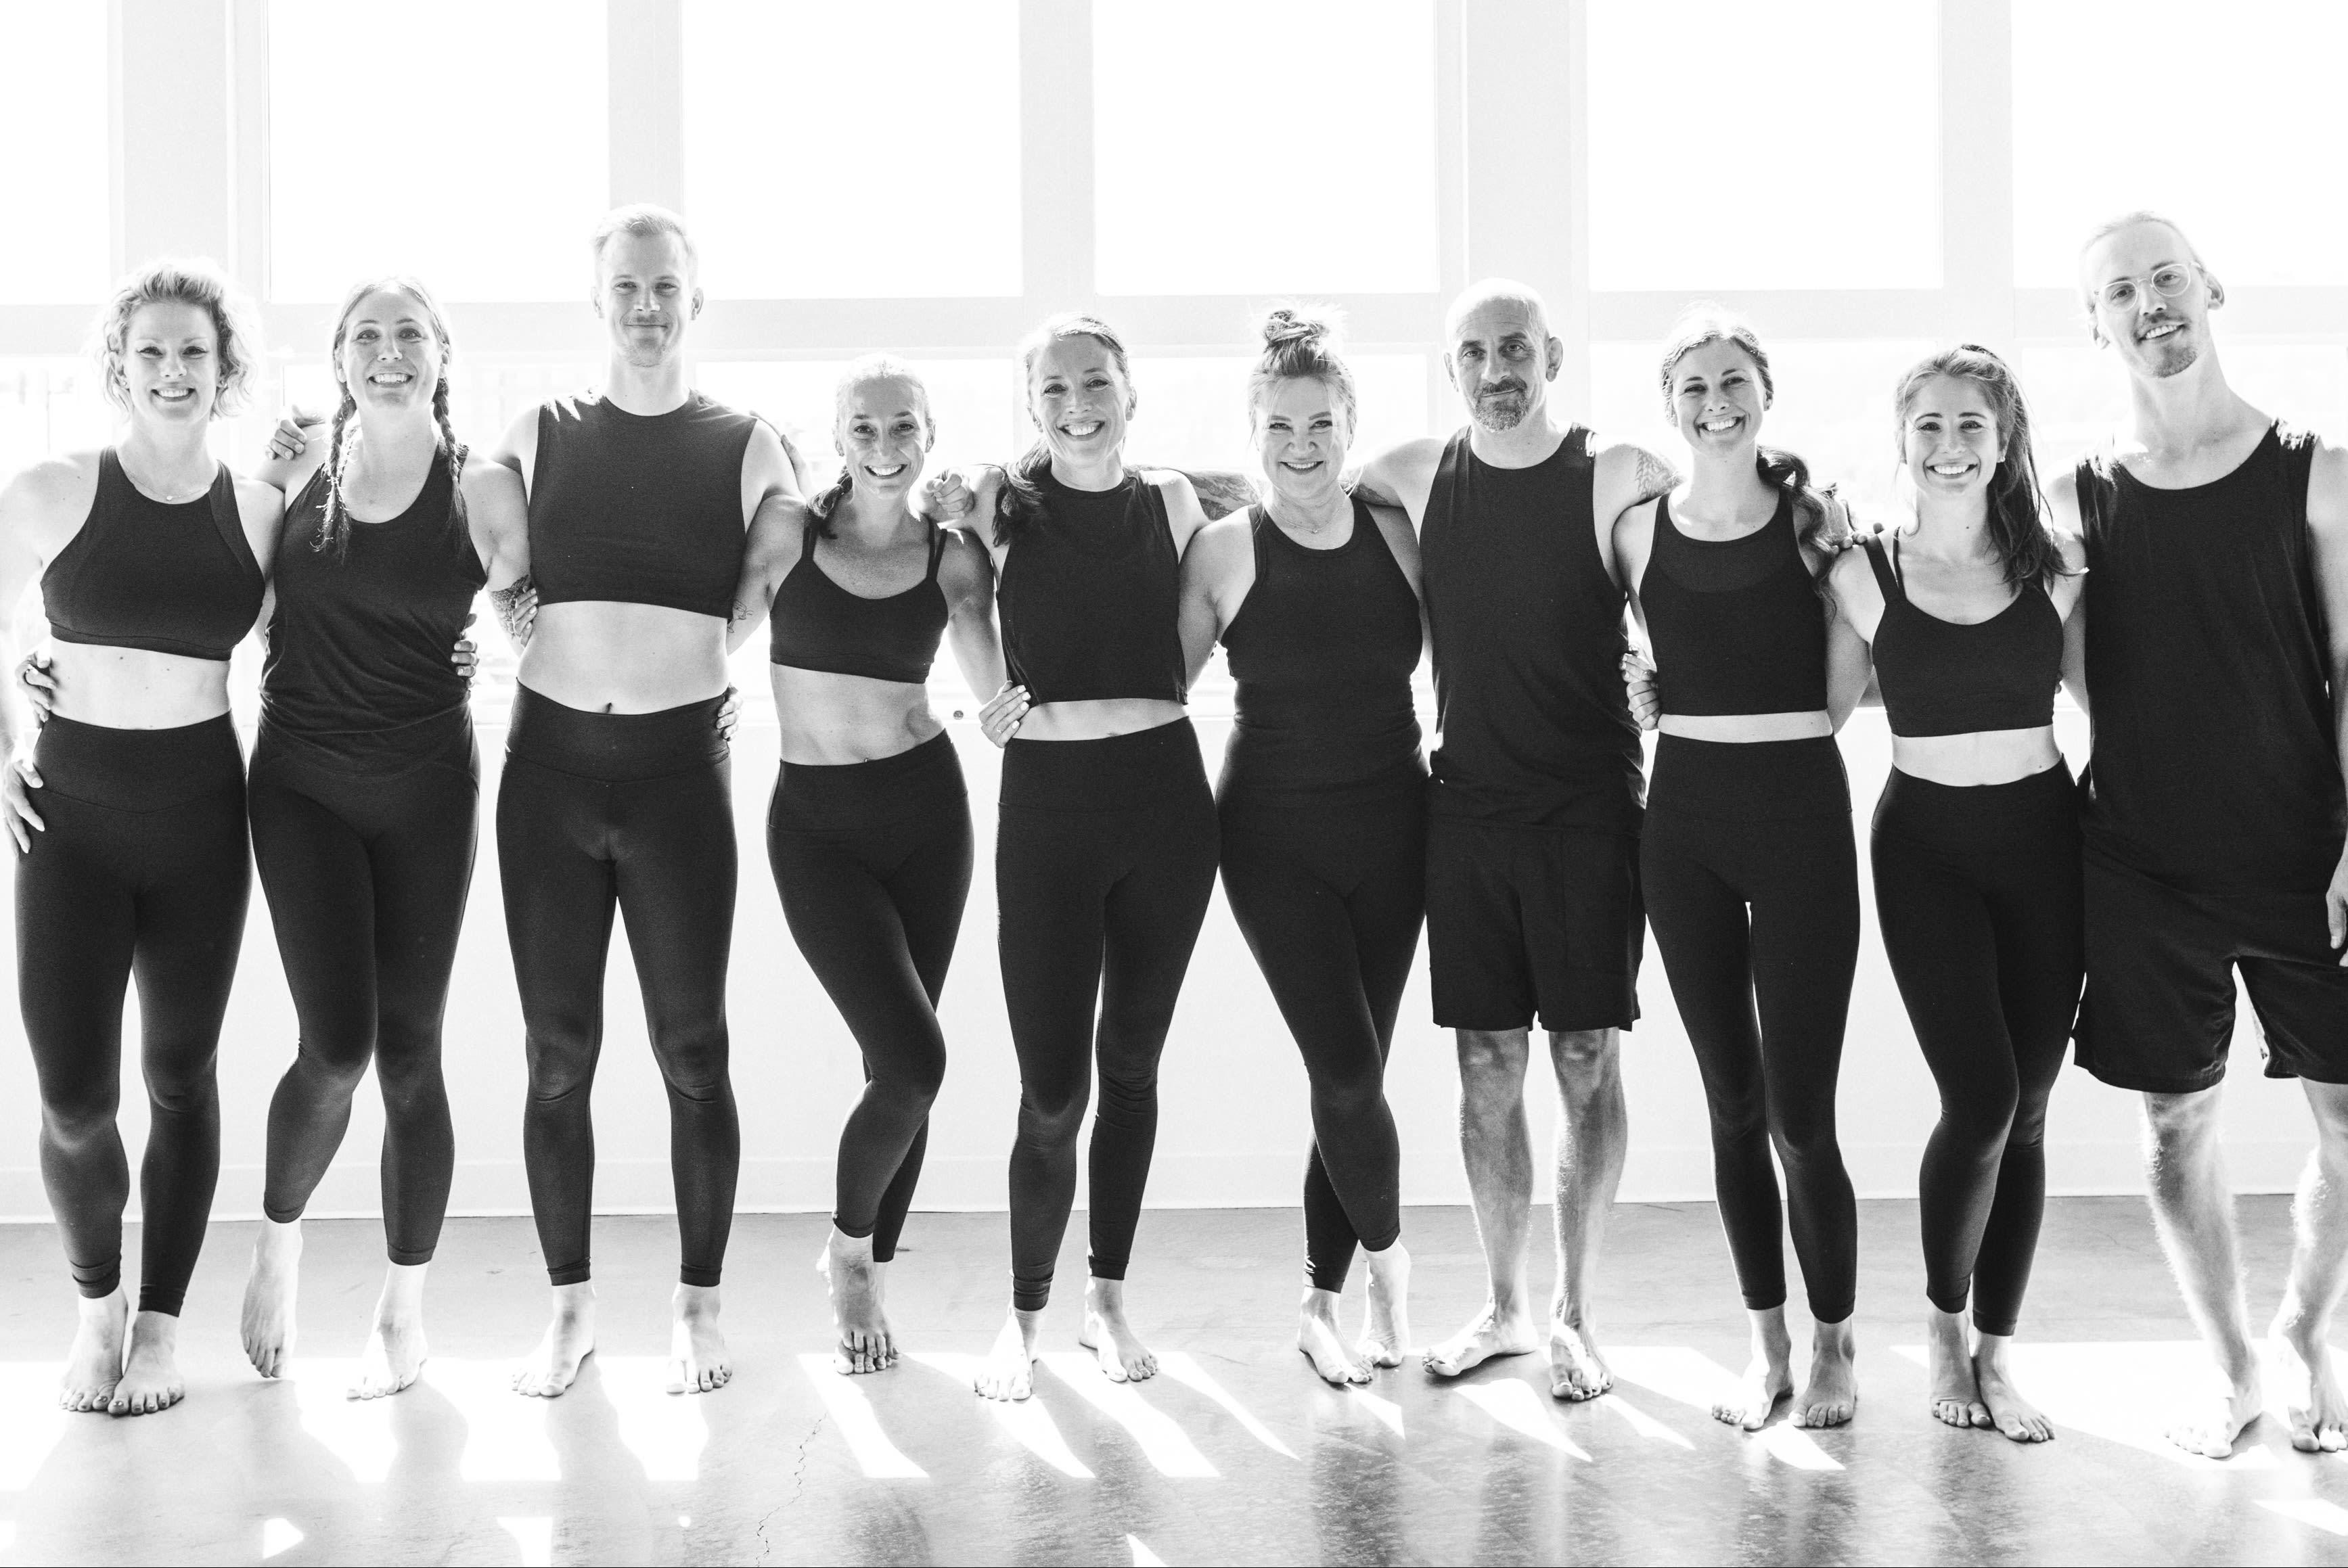 Workout Junkies Performance Lab: Read Reviews and Book Classes on ClassPass